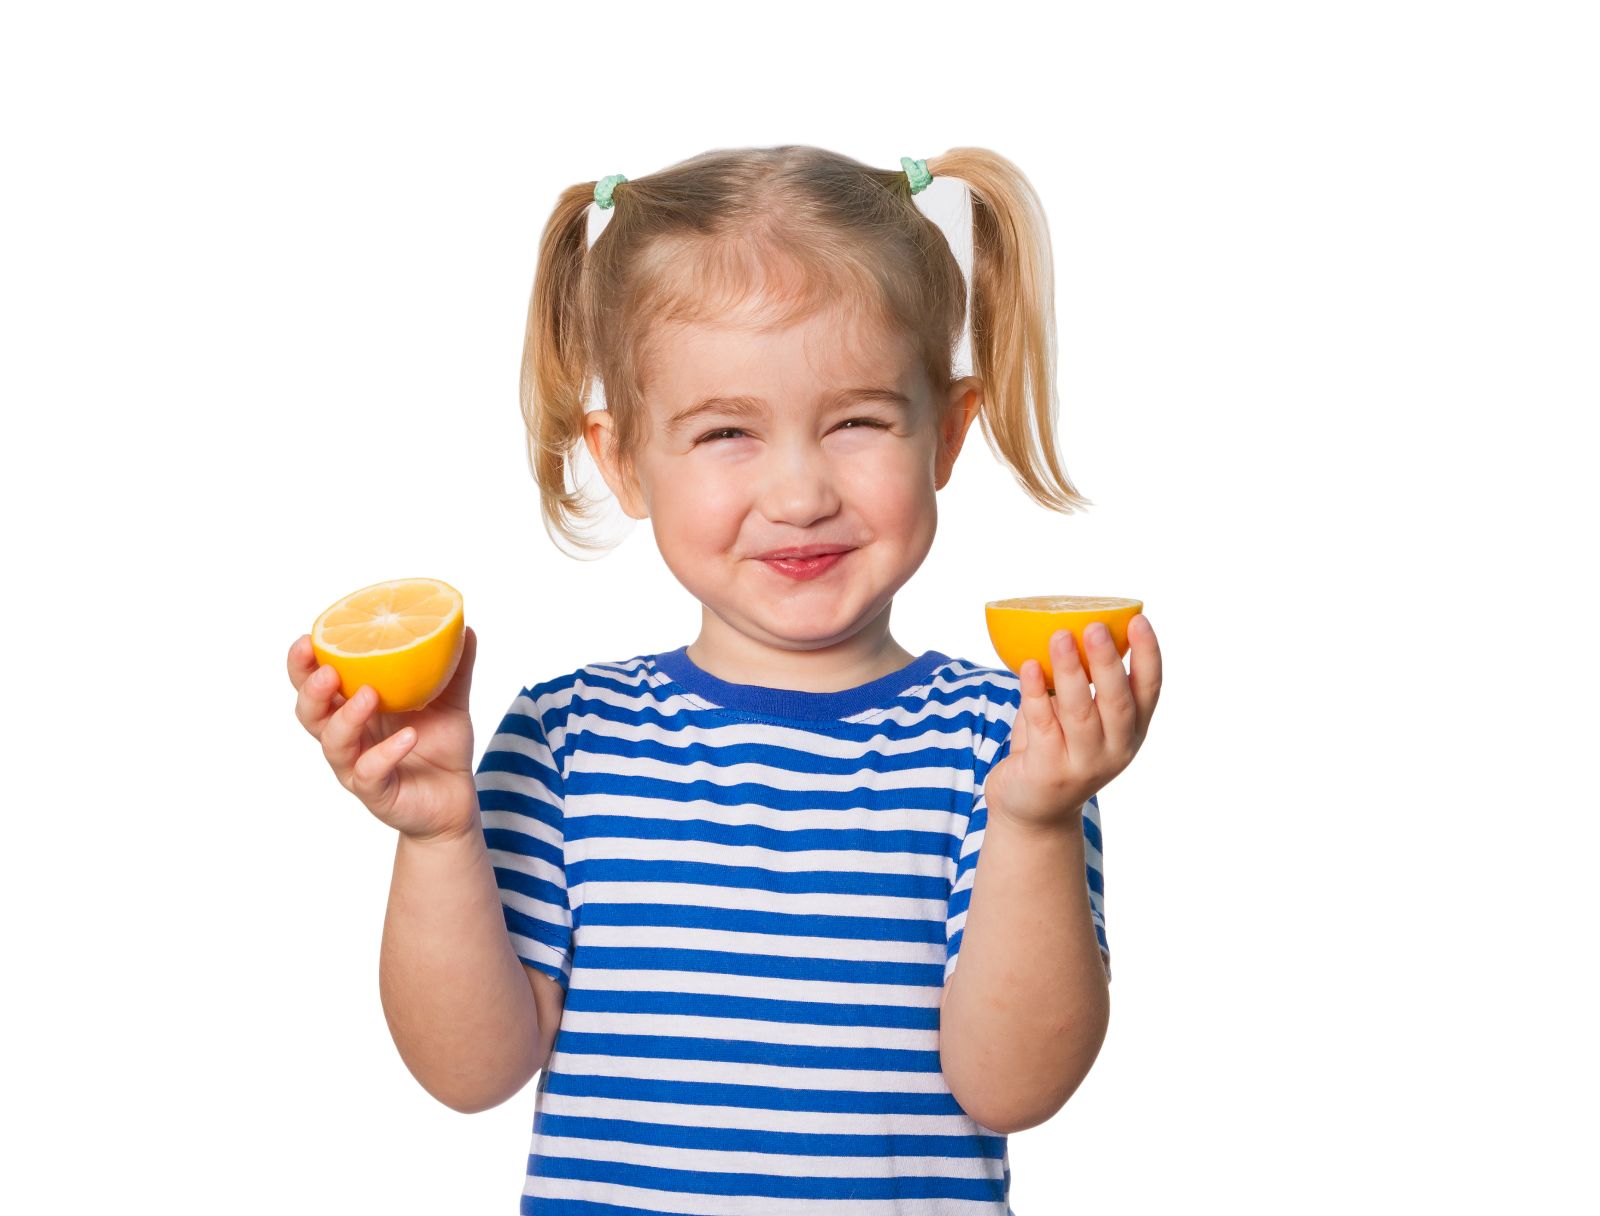 Small girl with pigtails holding a lemon cut in two